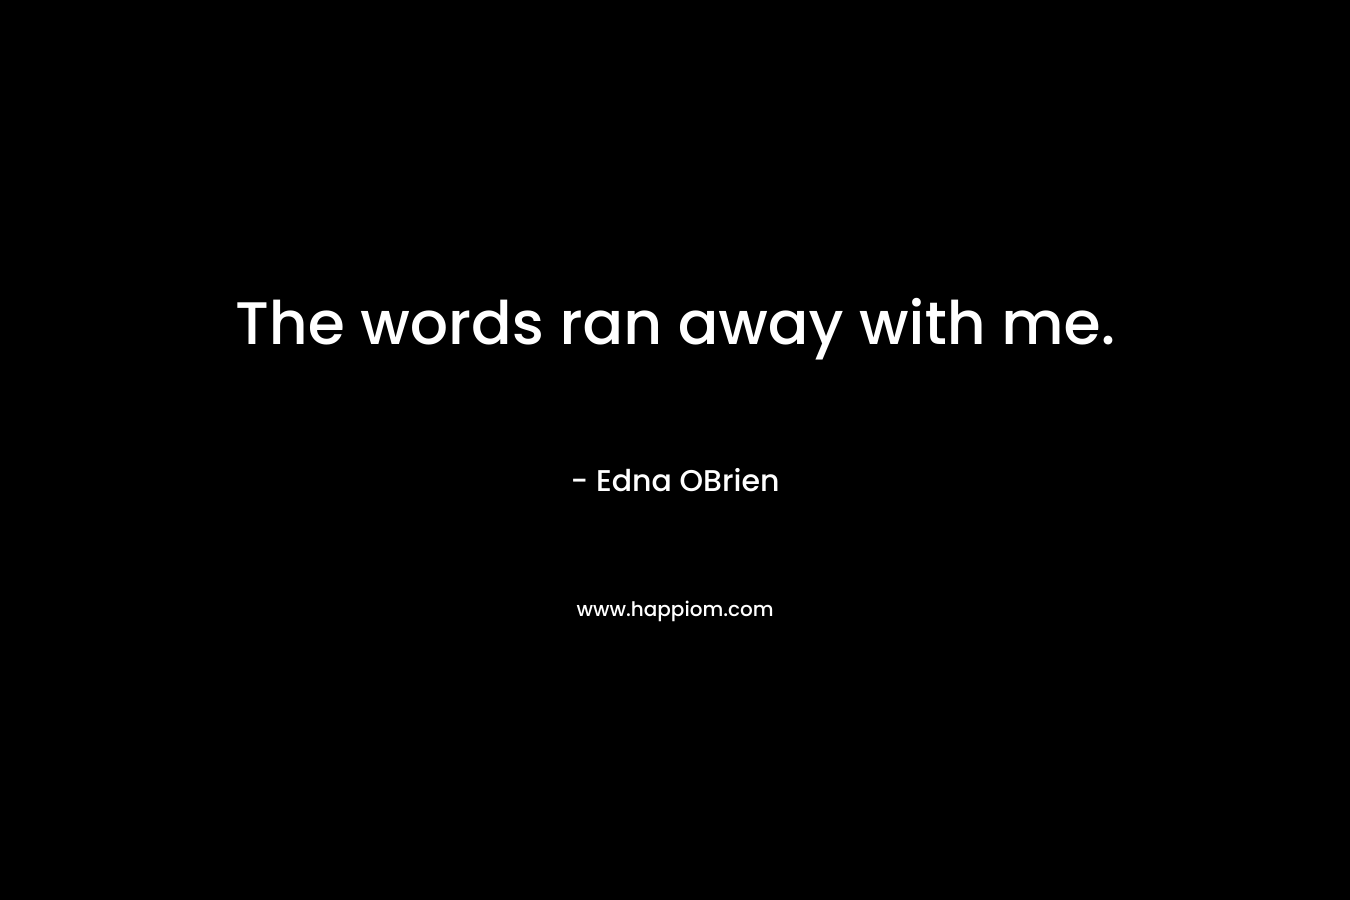 The words ran away with me. – Edna OBrien